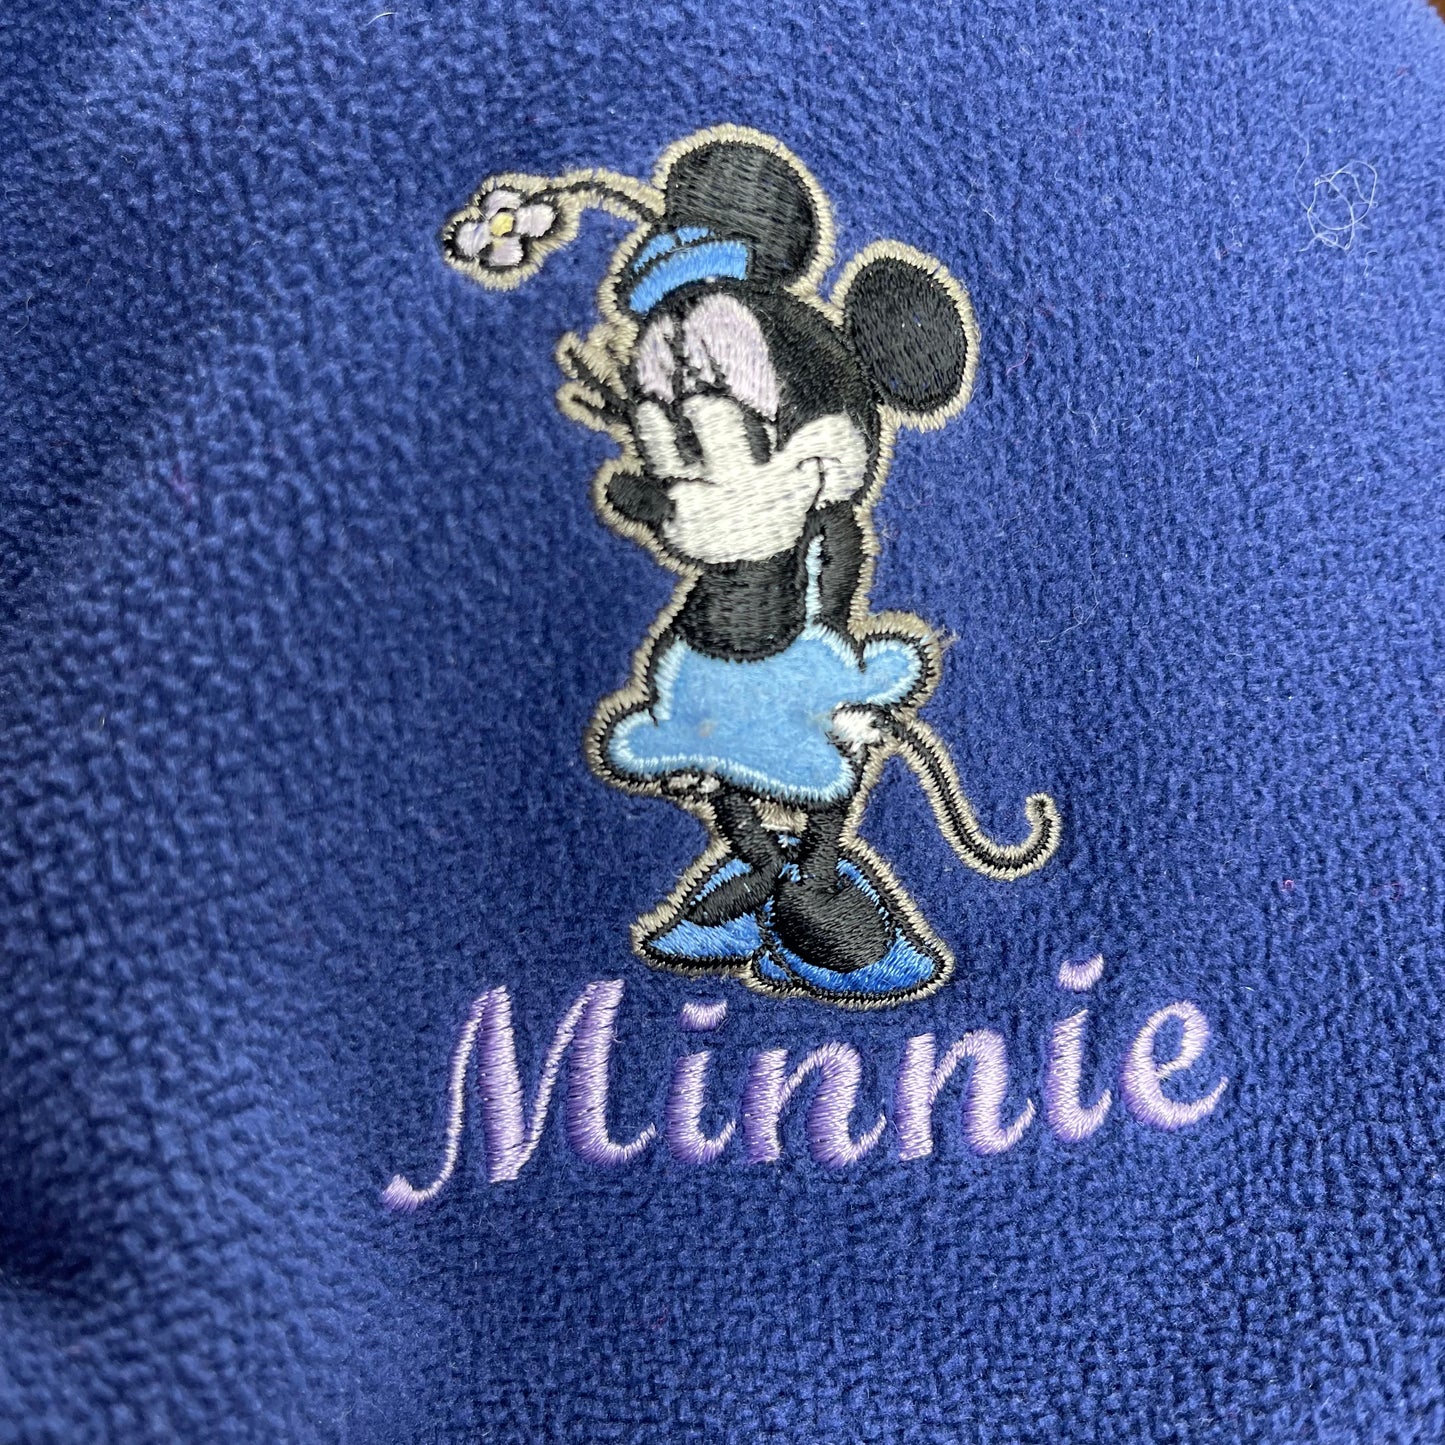 VINTAGE MINNIE MOUSE POLO SWEATER